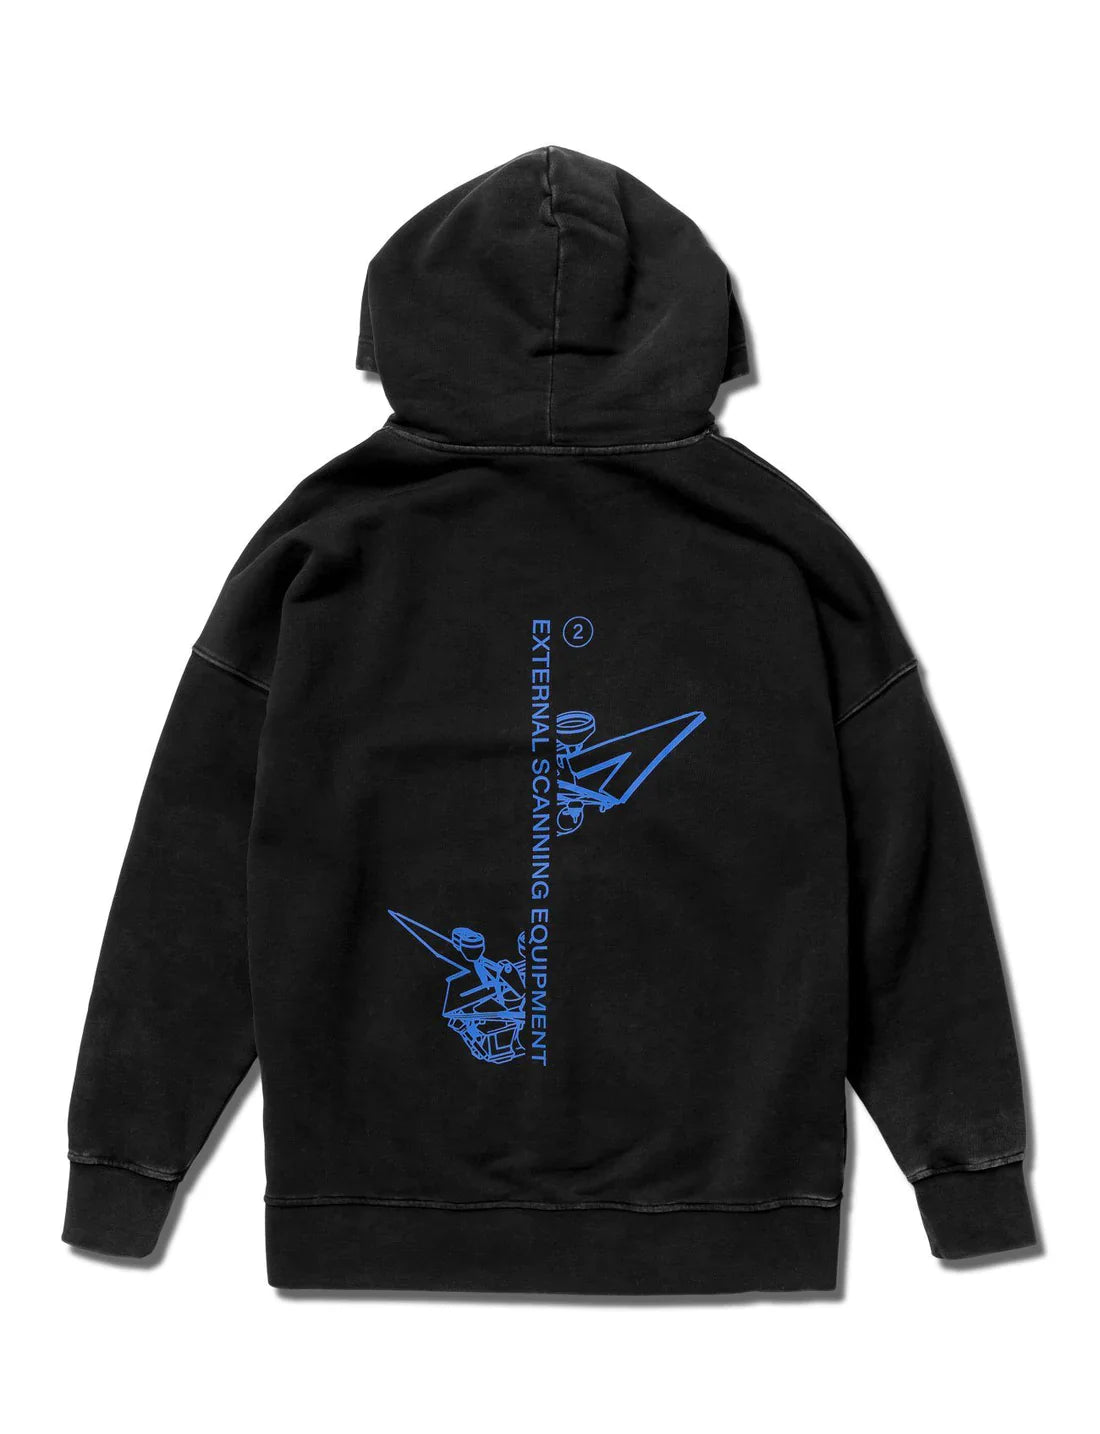 Back view of the black Drone Repair Shop Hoodie featuring intricate blue graphics with text related to external scanning equipment, marrying technical geek chic with urban streetwear style.